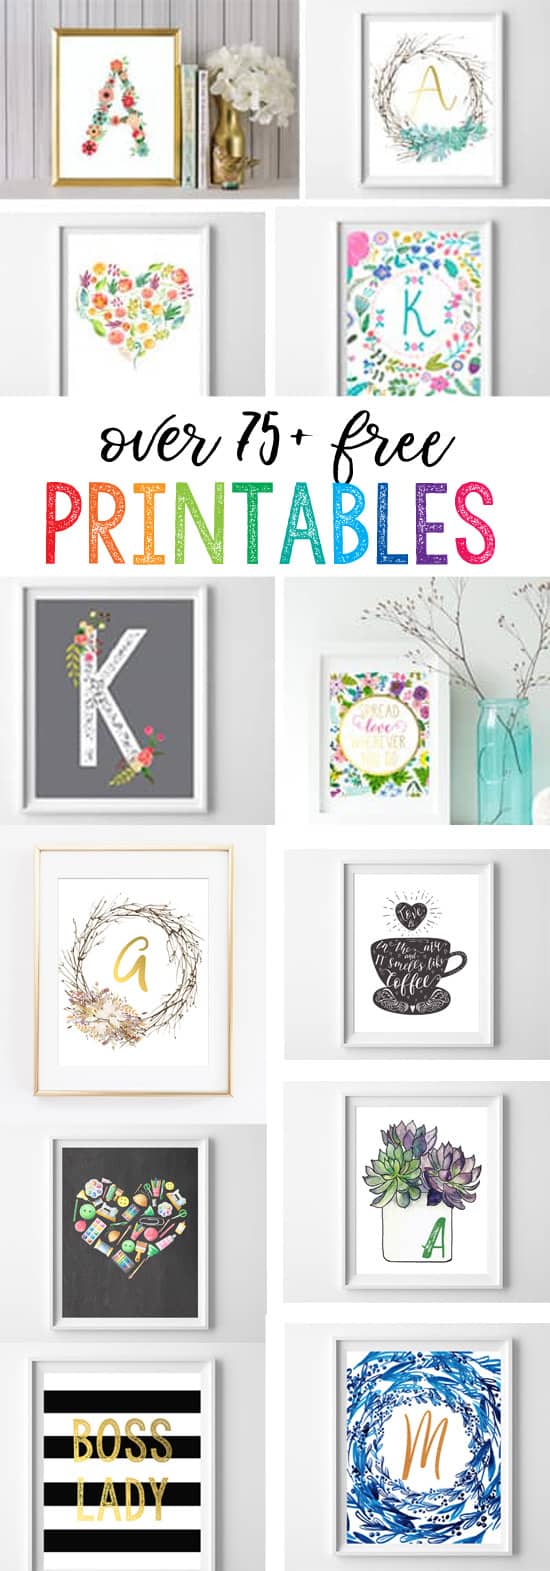 free printables for home